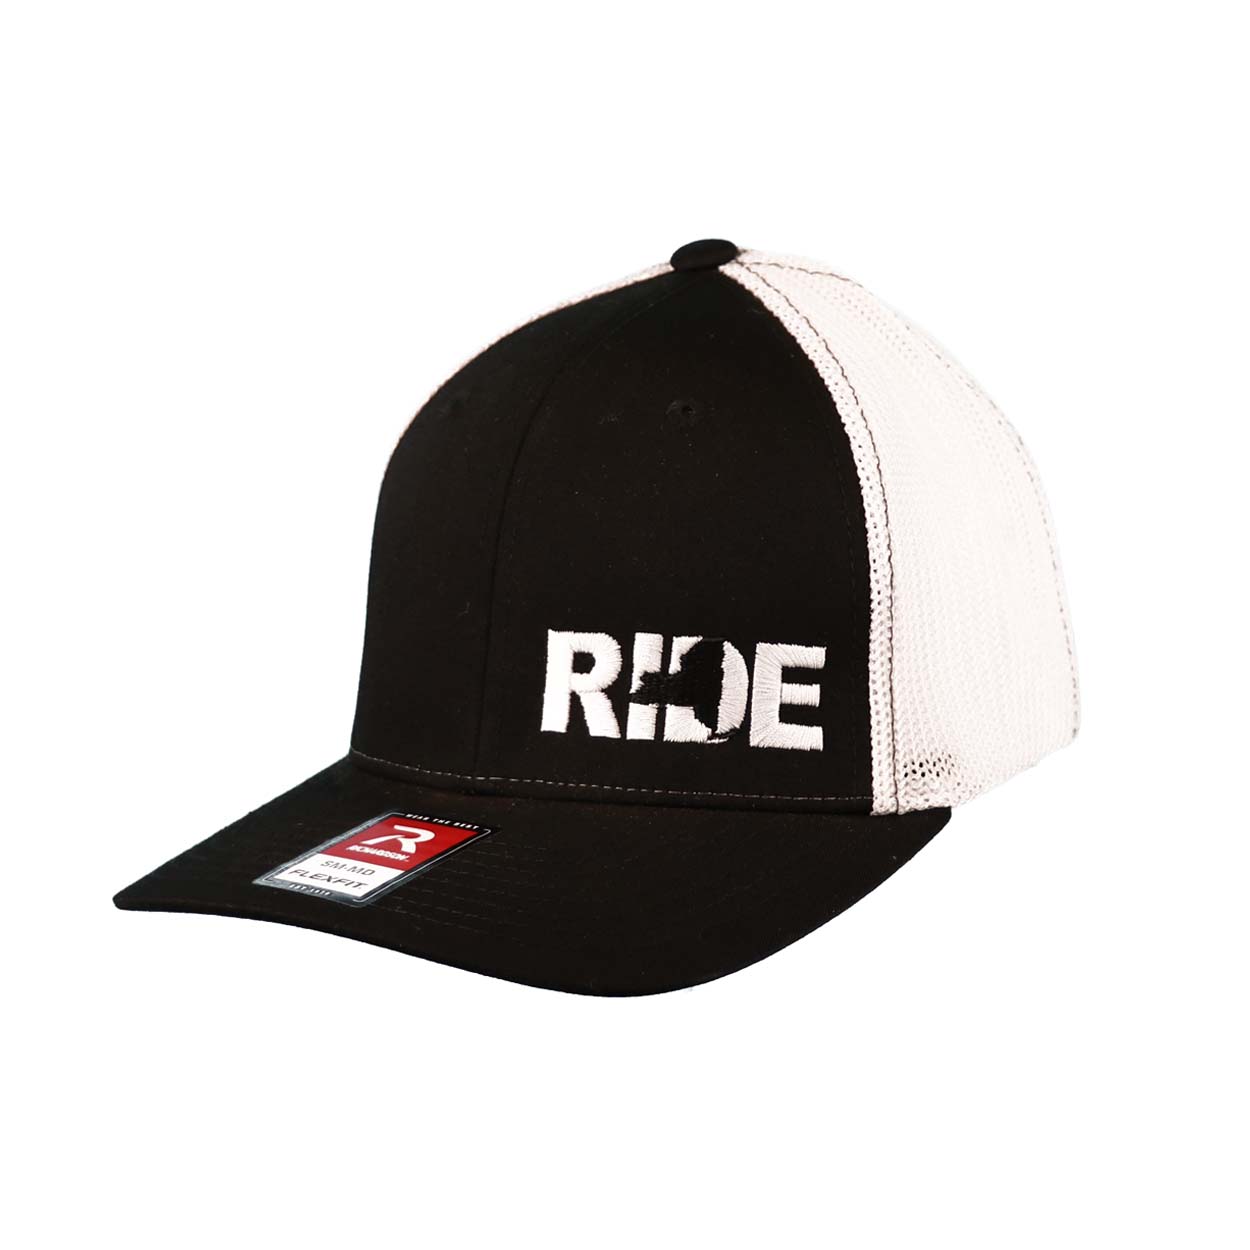 Ride New York Night Out Pro Embroidered Flex Fit Trucker Hat Black/White